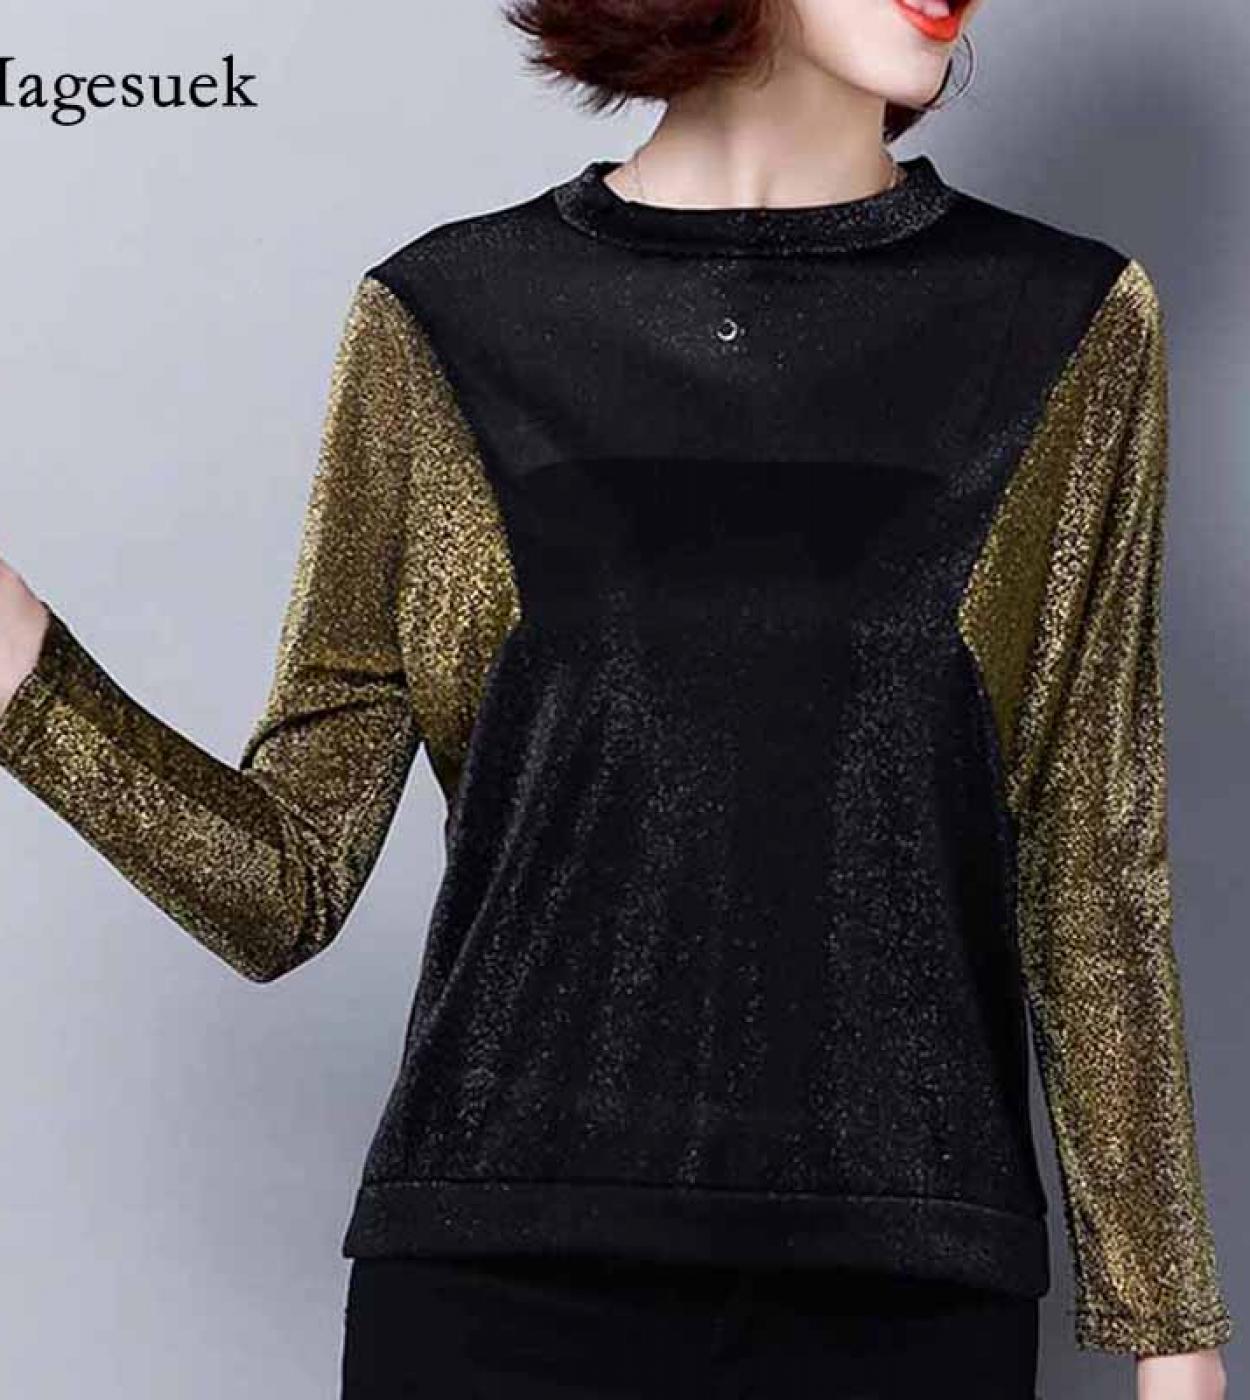 Women  Autumn New Style Loose Contrasting Color Splicing Oneck Bottoming Shirt Long Sleeve Tshirt Women Tops 10583  Tshi